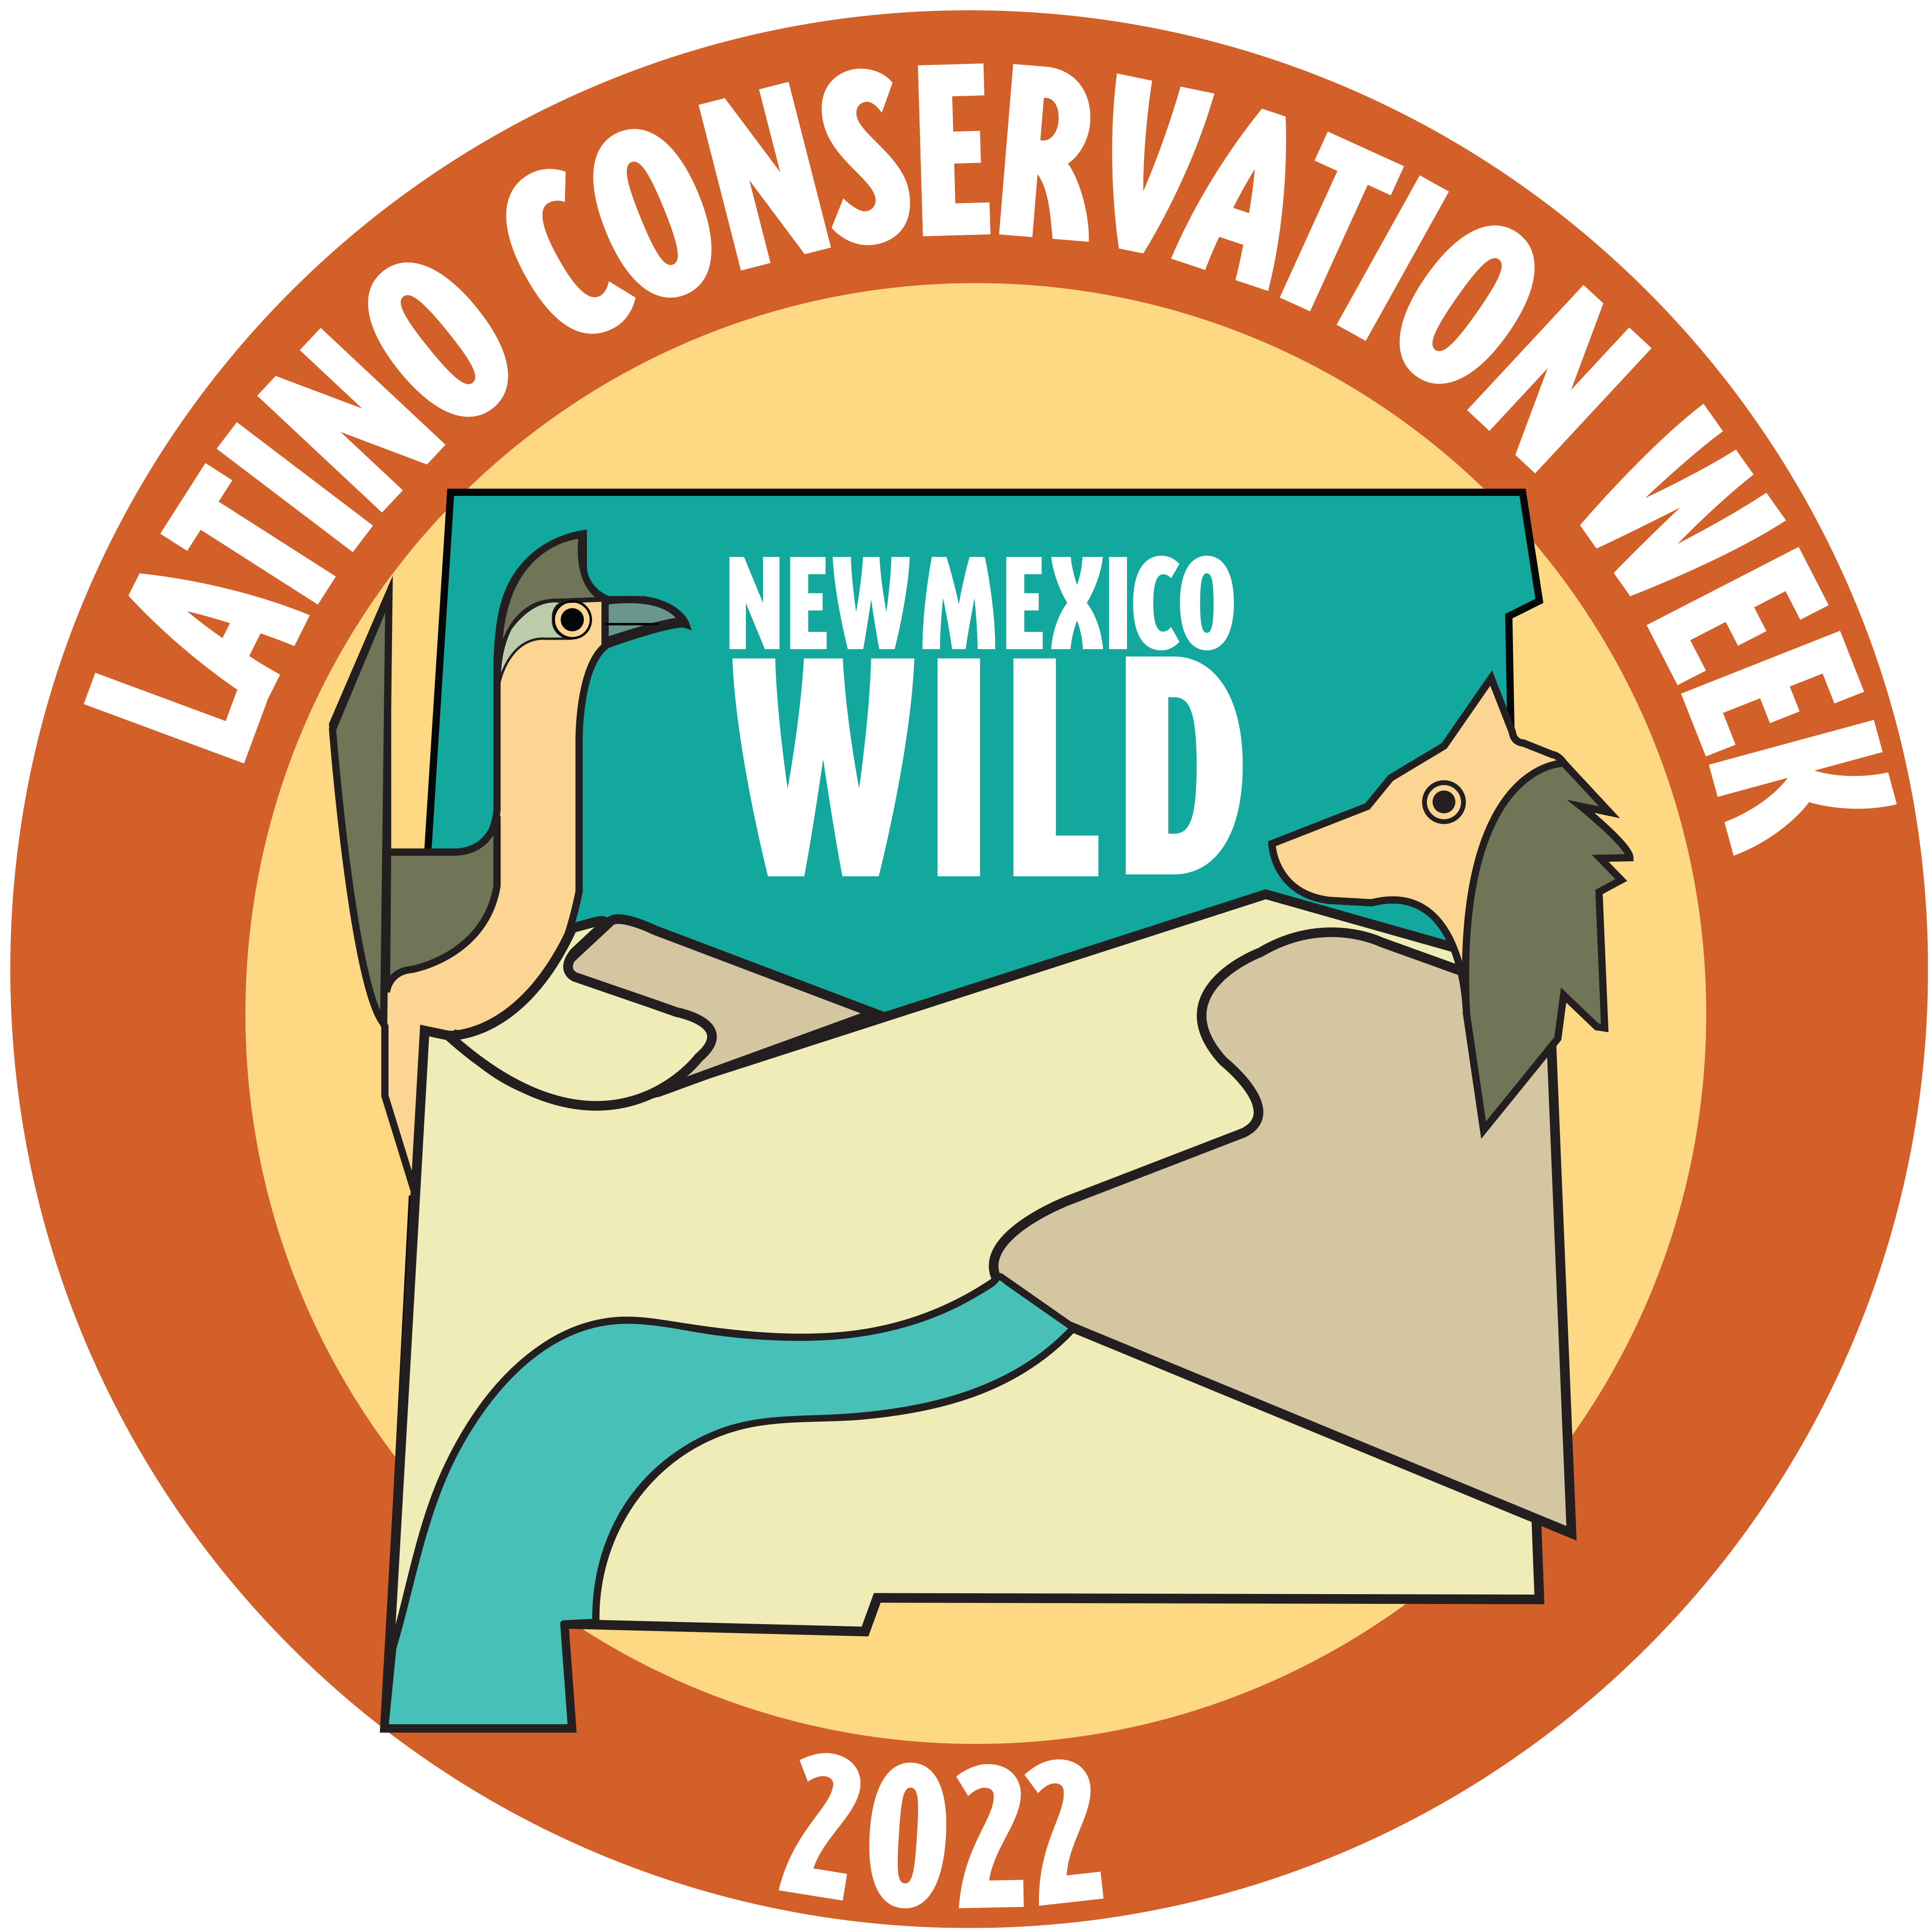 Hispano/Latino Conservation Week Celebration Comes to the Plaza in Las Vegas, New Mexico